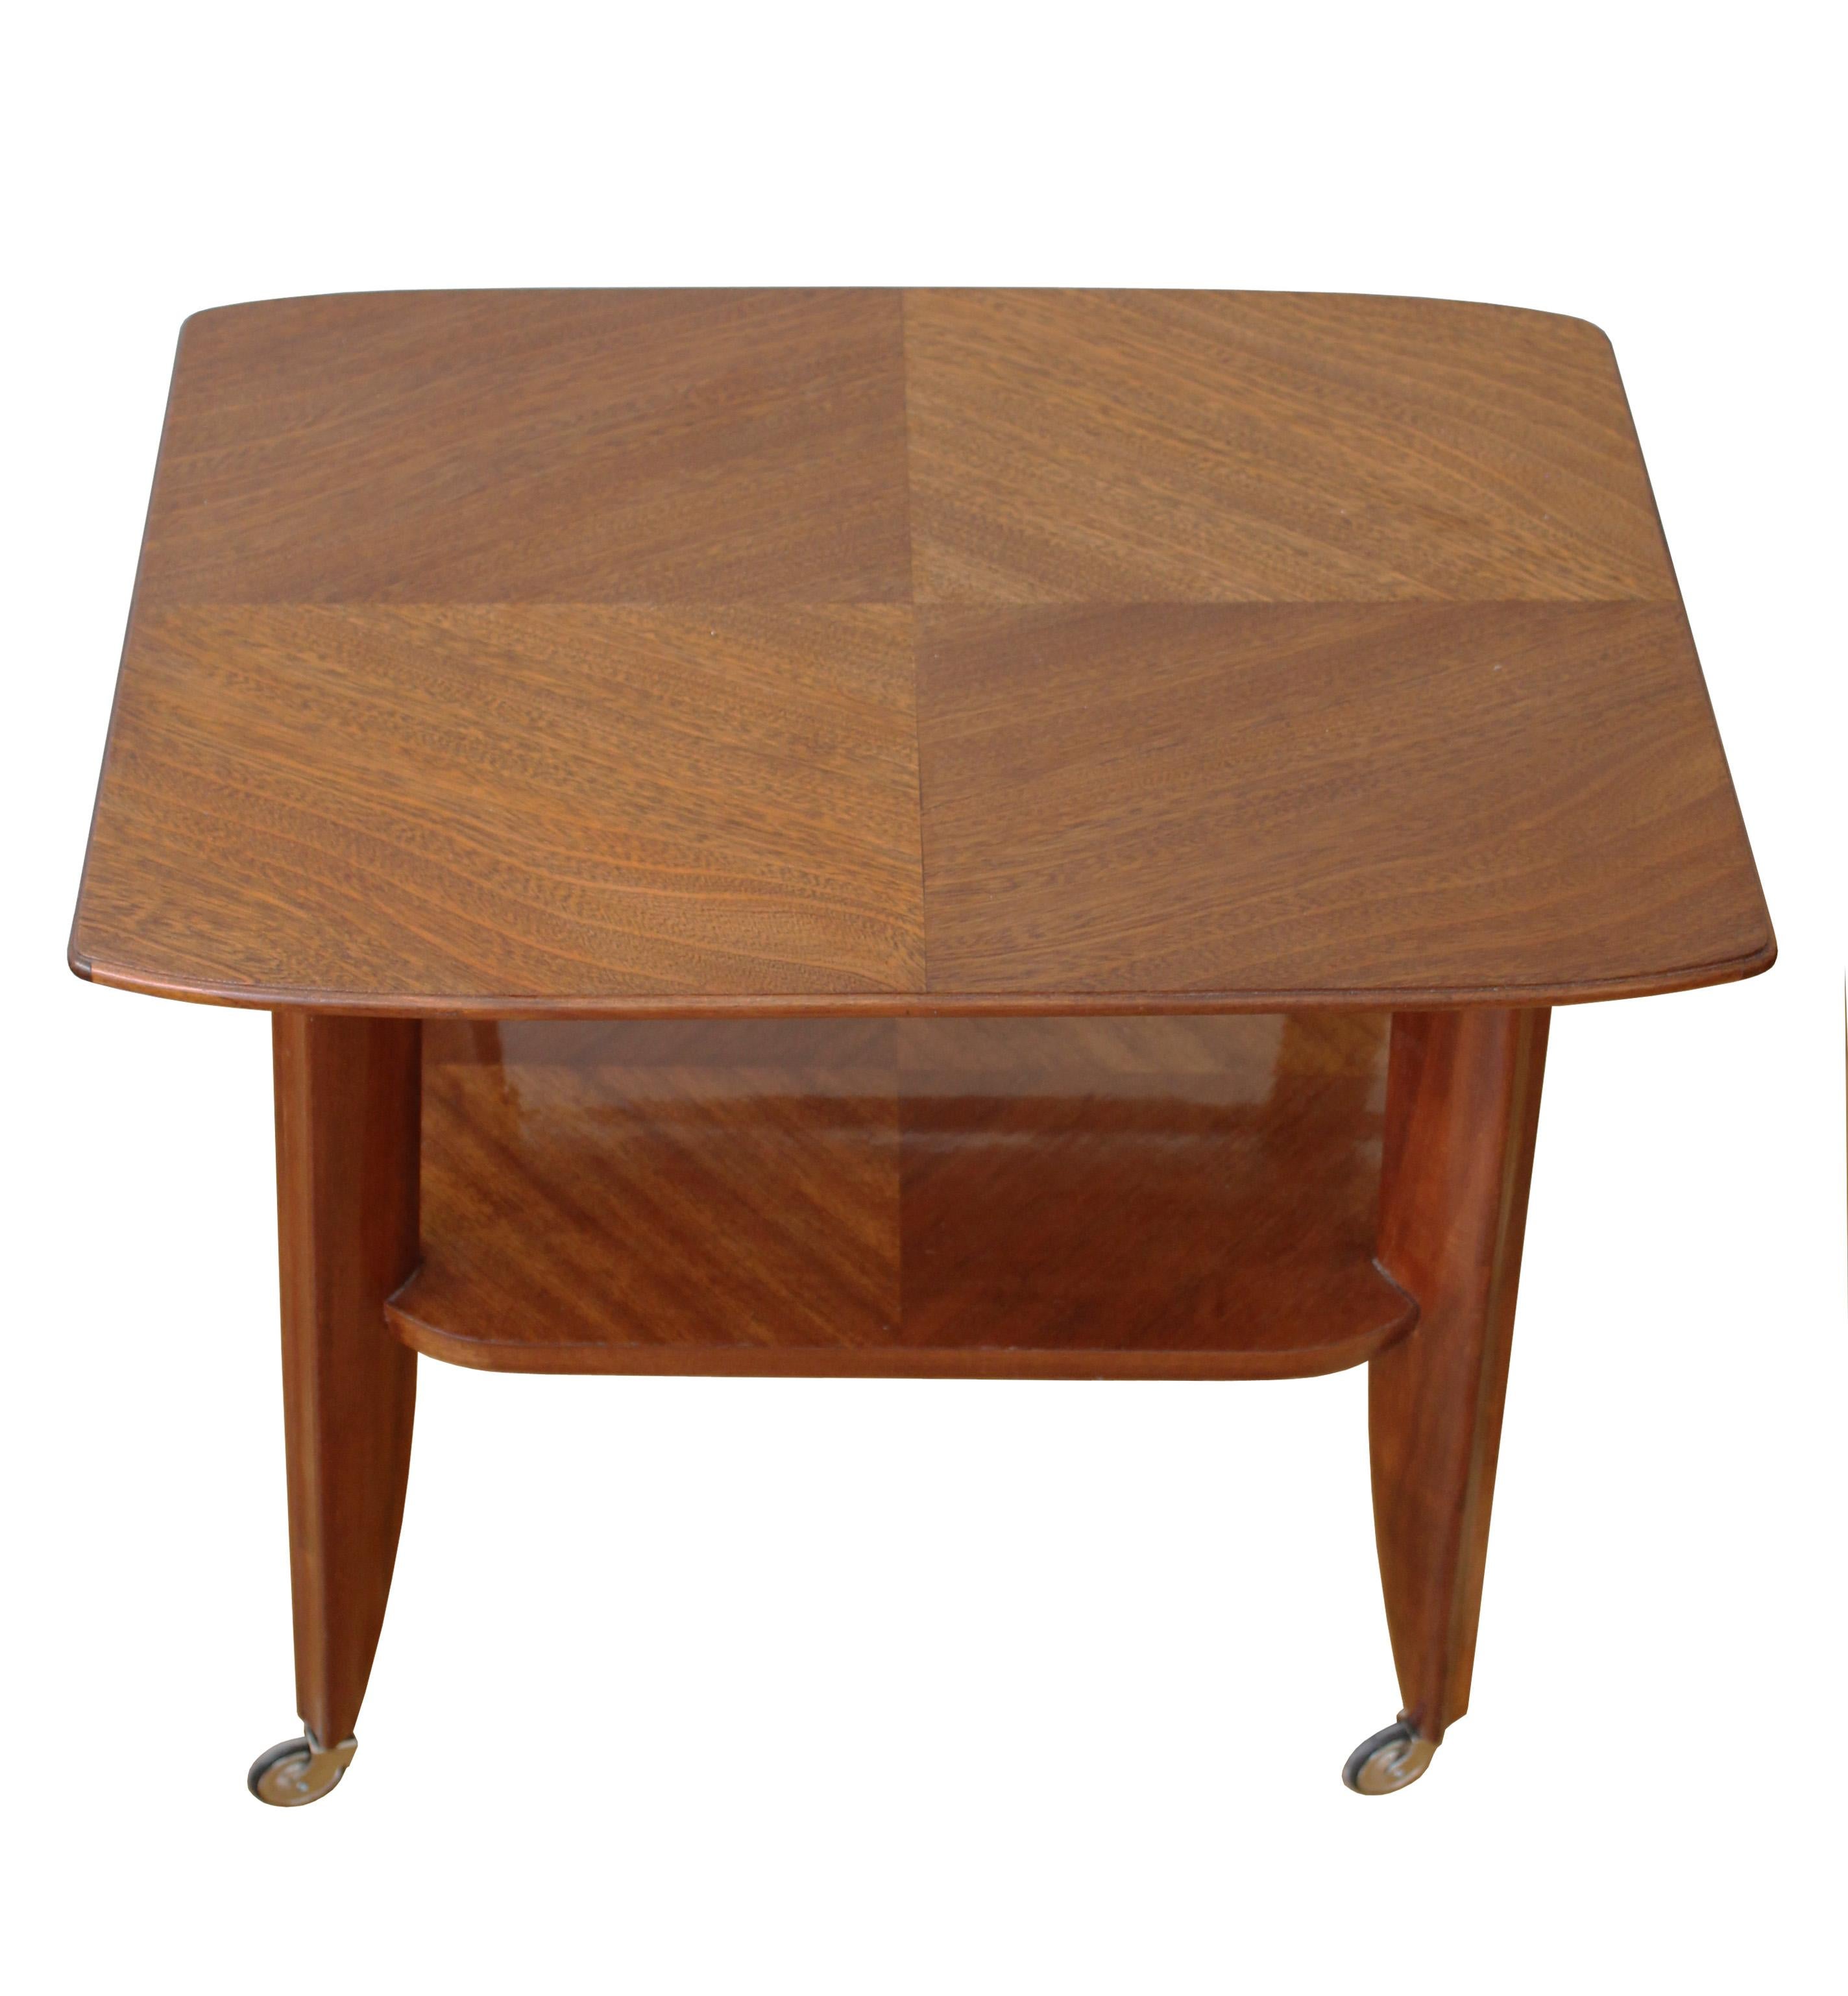 A stunning serving table on caster wheels, made entirely of mahogany wood. 

What makes this piece really stand out is the elegant gentle curves and the rich texture of the mahogany wood on both the top of the piece and the lower shelf. The top